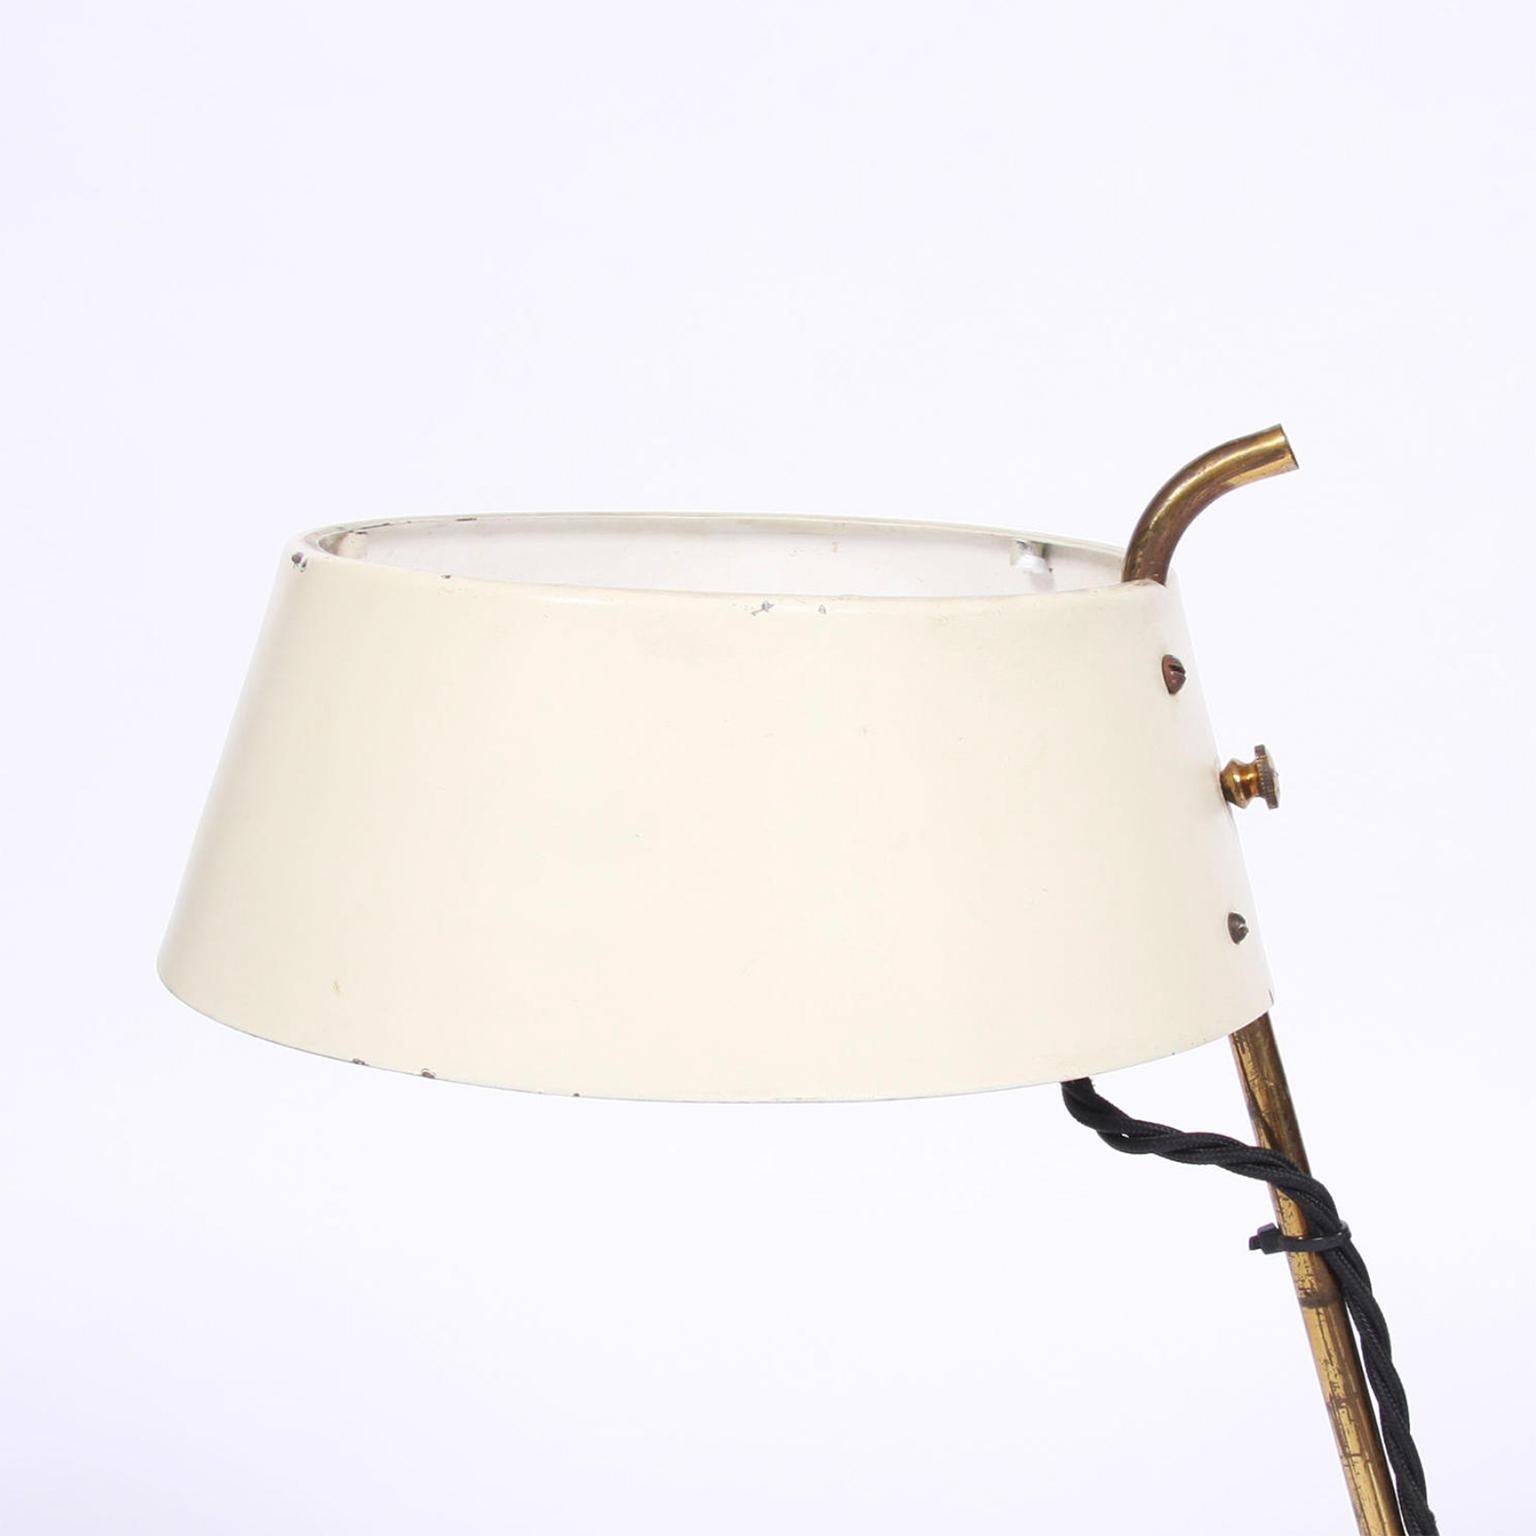 Italian, circa 1950

A small table lamp with a cream metal shade and chic 